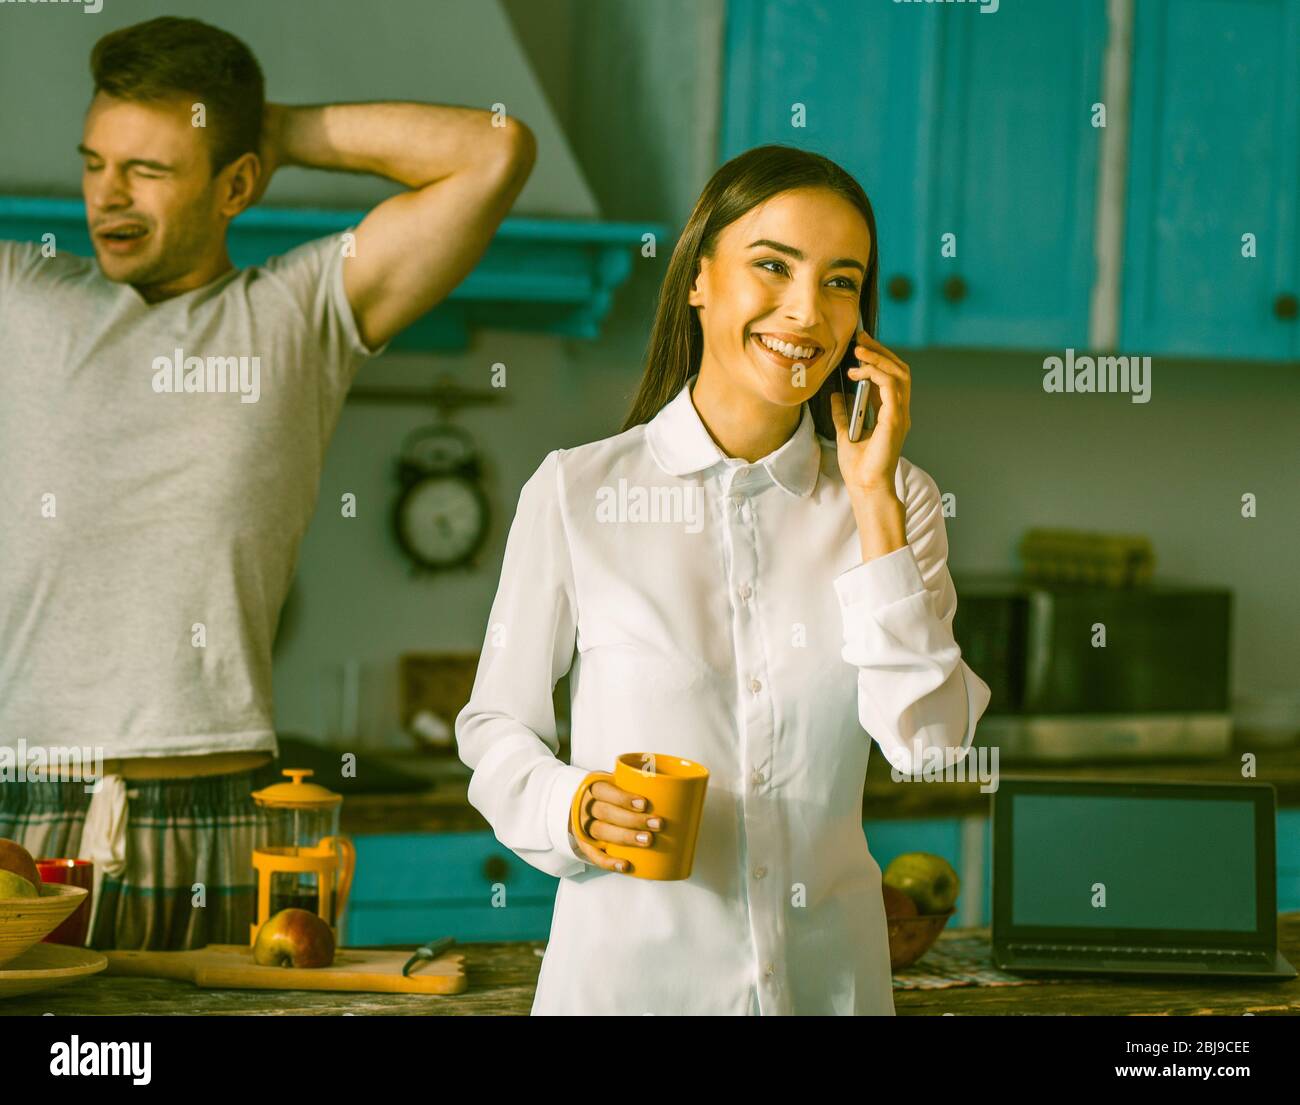 Morning Of Young Family In Domestic Kitchen Stock Photo